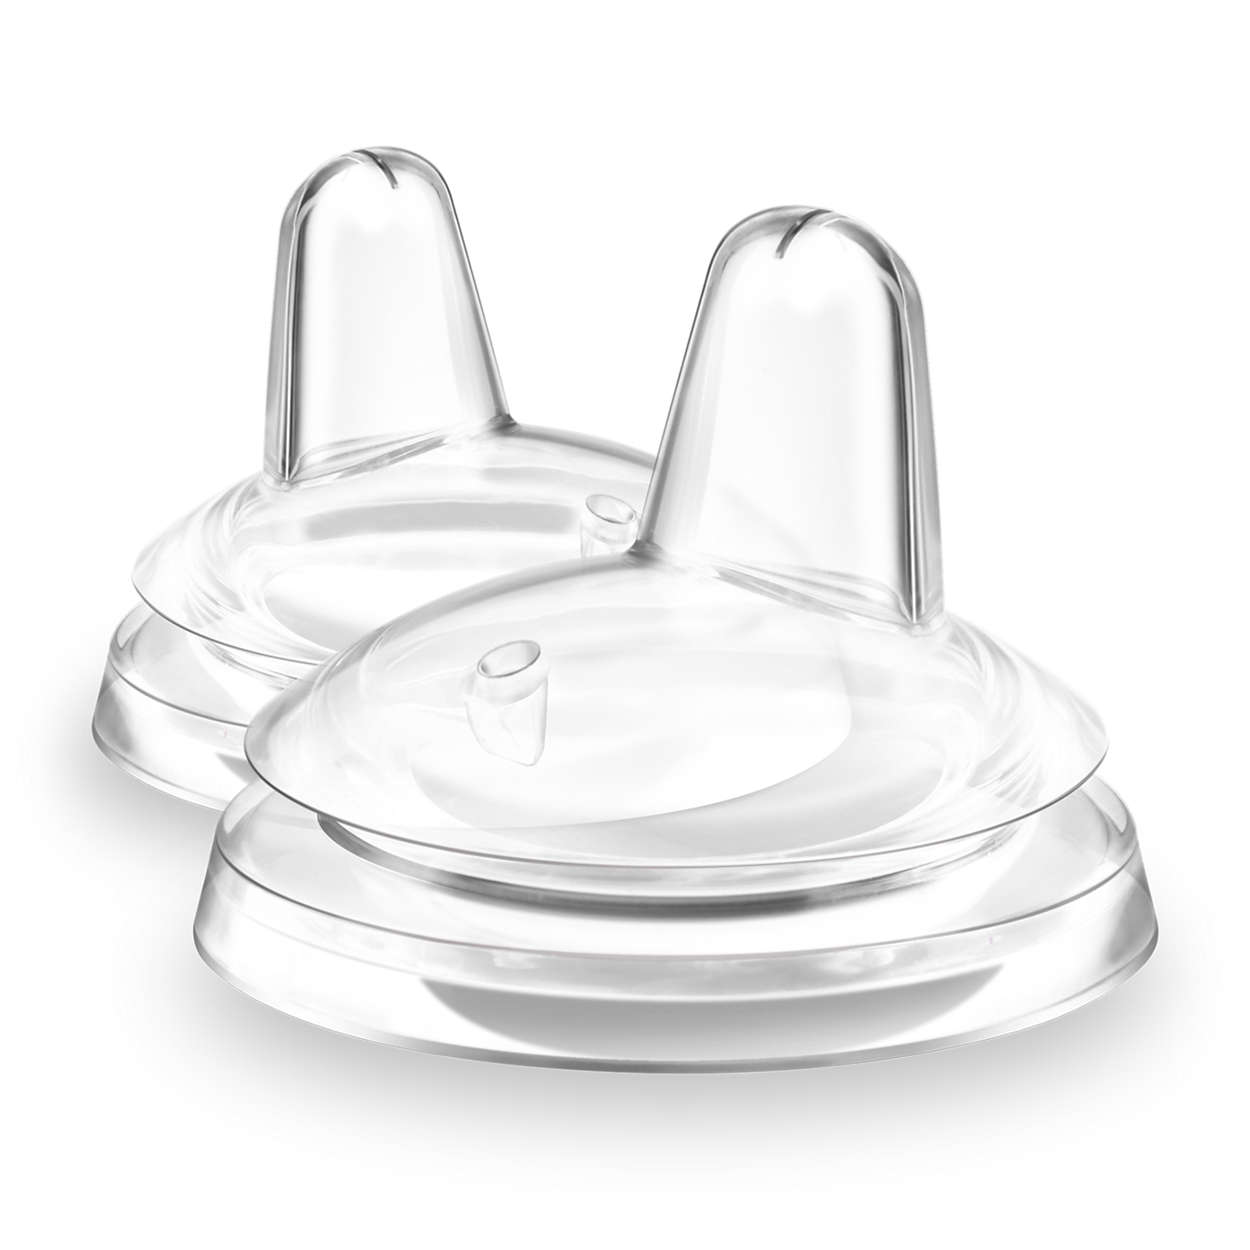 Flexible silicone spout that's gentle on gums